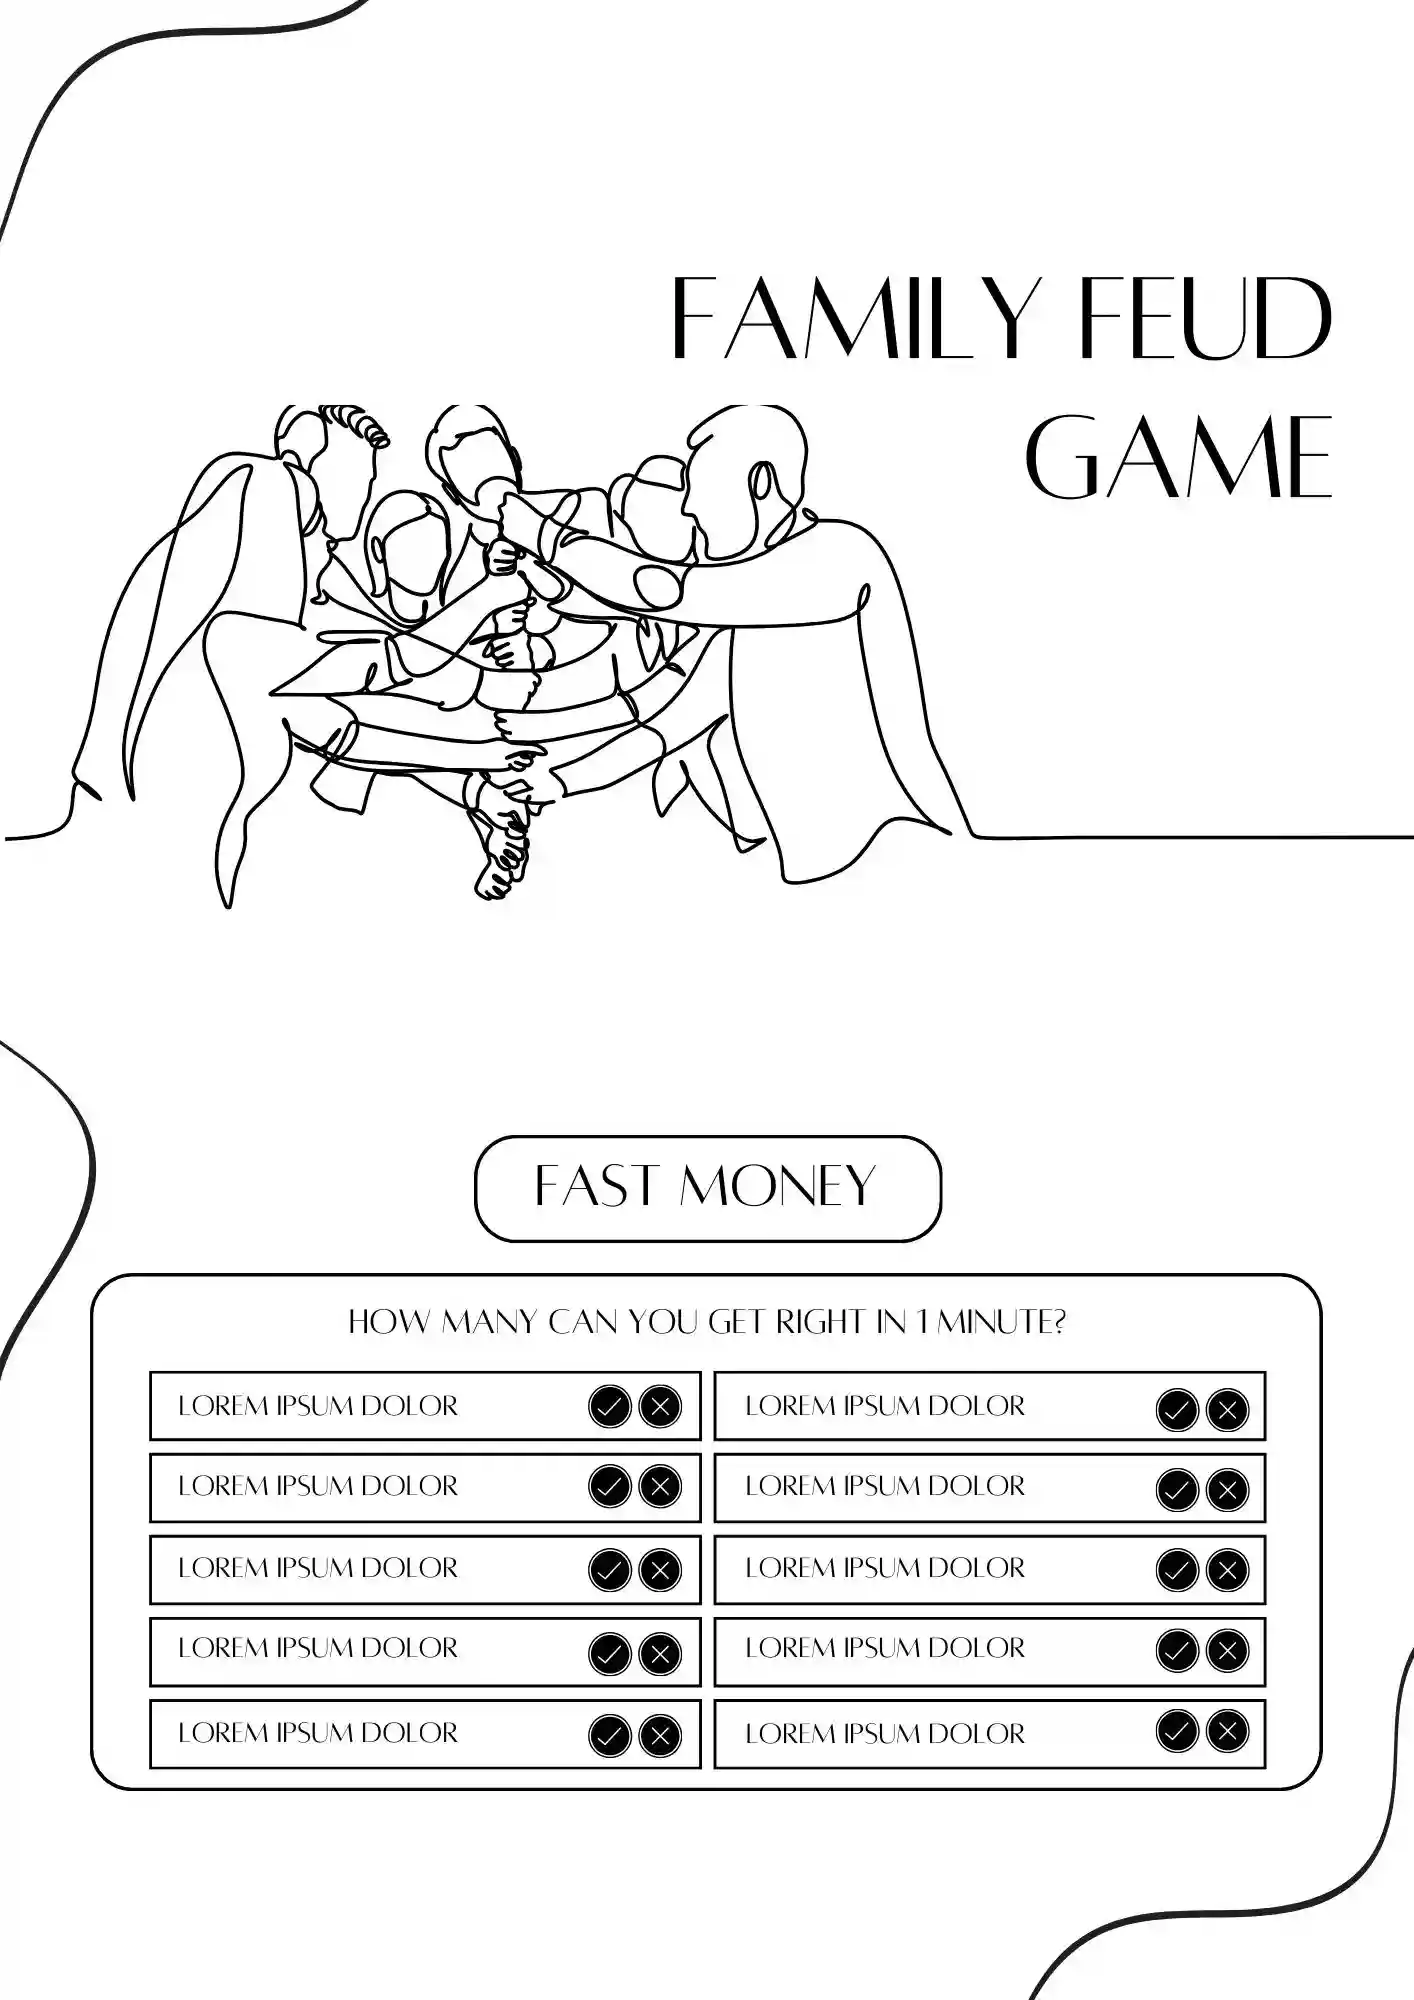 Family Feud Game Template for Large Groups